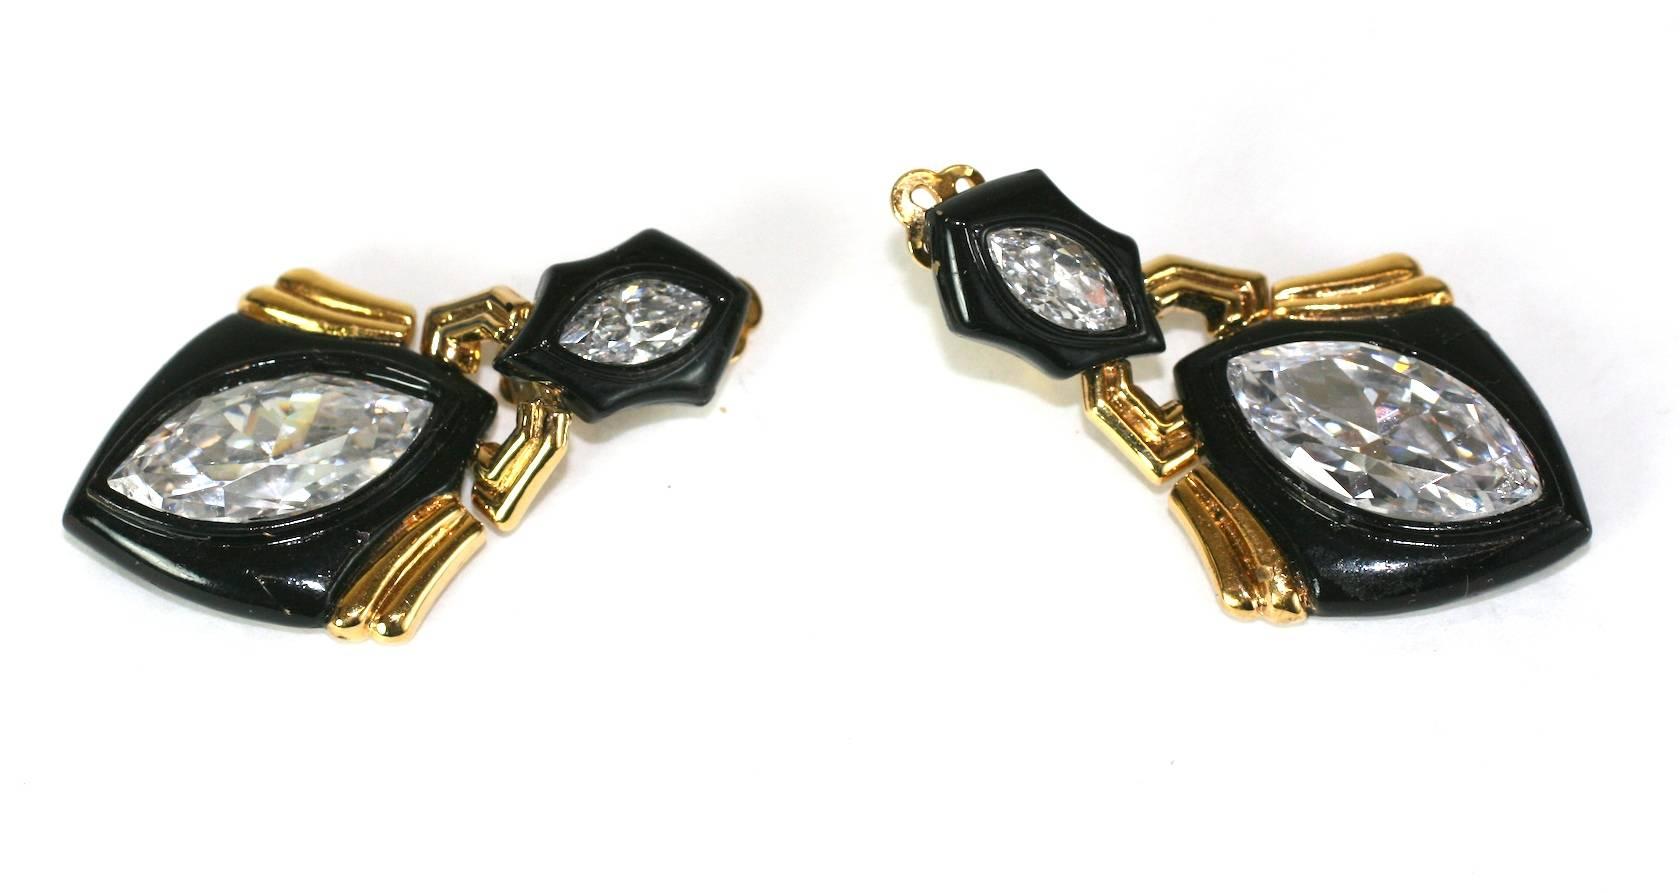 Angela Kramer was a fine jeweler who also designed costume jewelry in the 1990's. Her designs were similar to Marina B and Bulgari designs of the day. 
In these dangle earrings, she uses black enamel against gold plated metal and sets them with